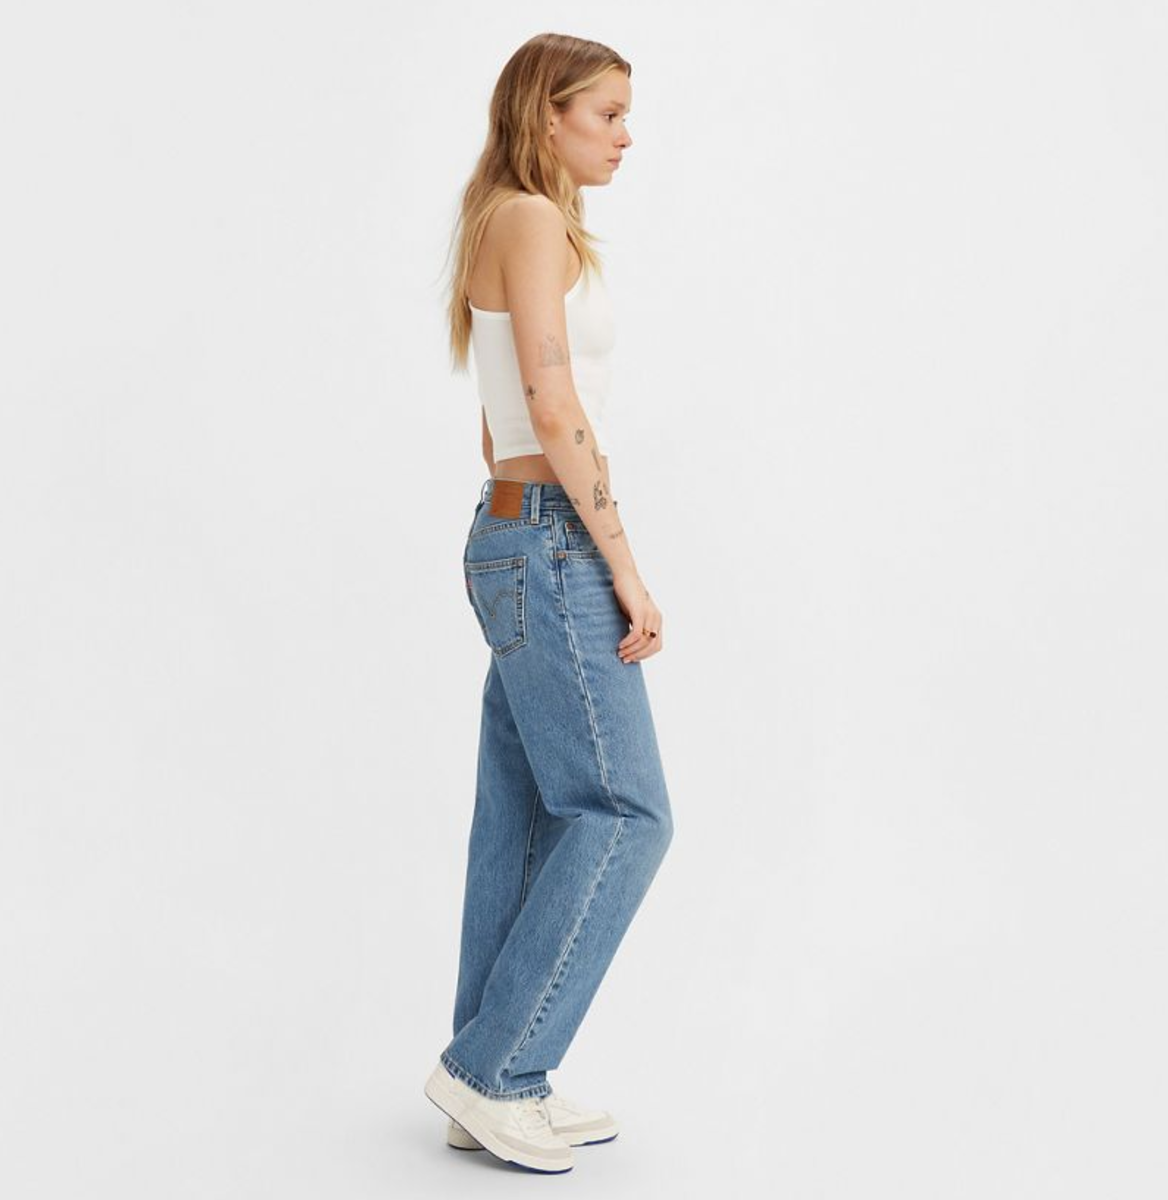 Andrew Halliday Misunderstand slow Levi's Just Really Nailed It With These '90s-Inspired Jeans - Fashionista